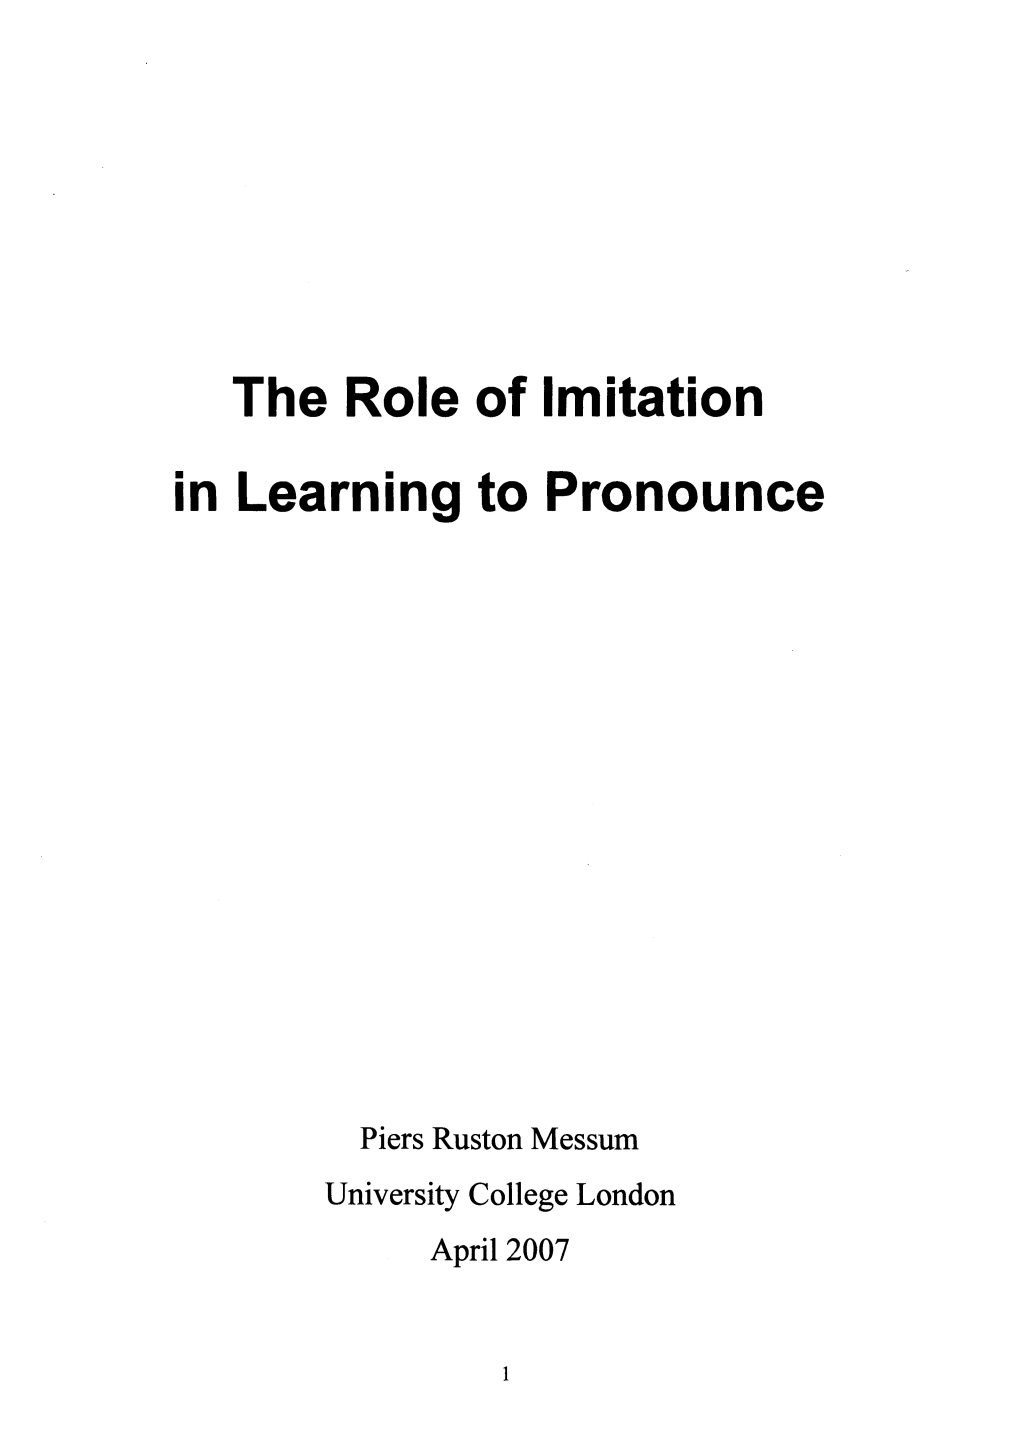 The Role of Imitation in Learning to Pronounce